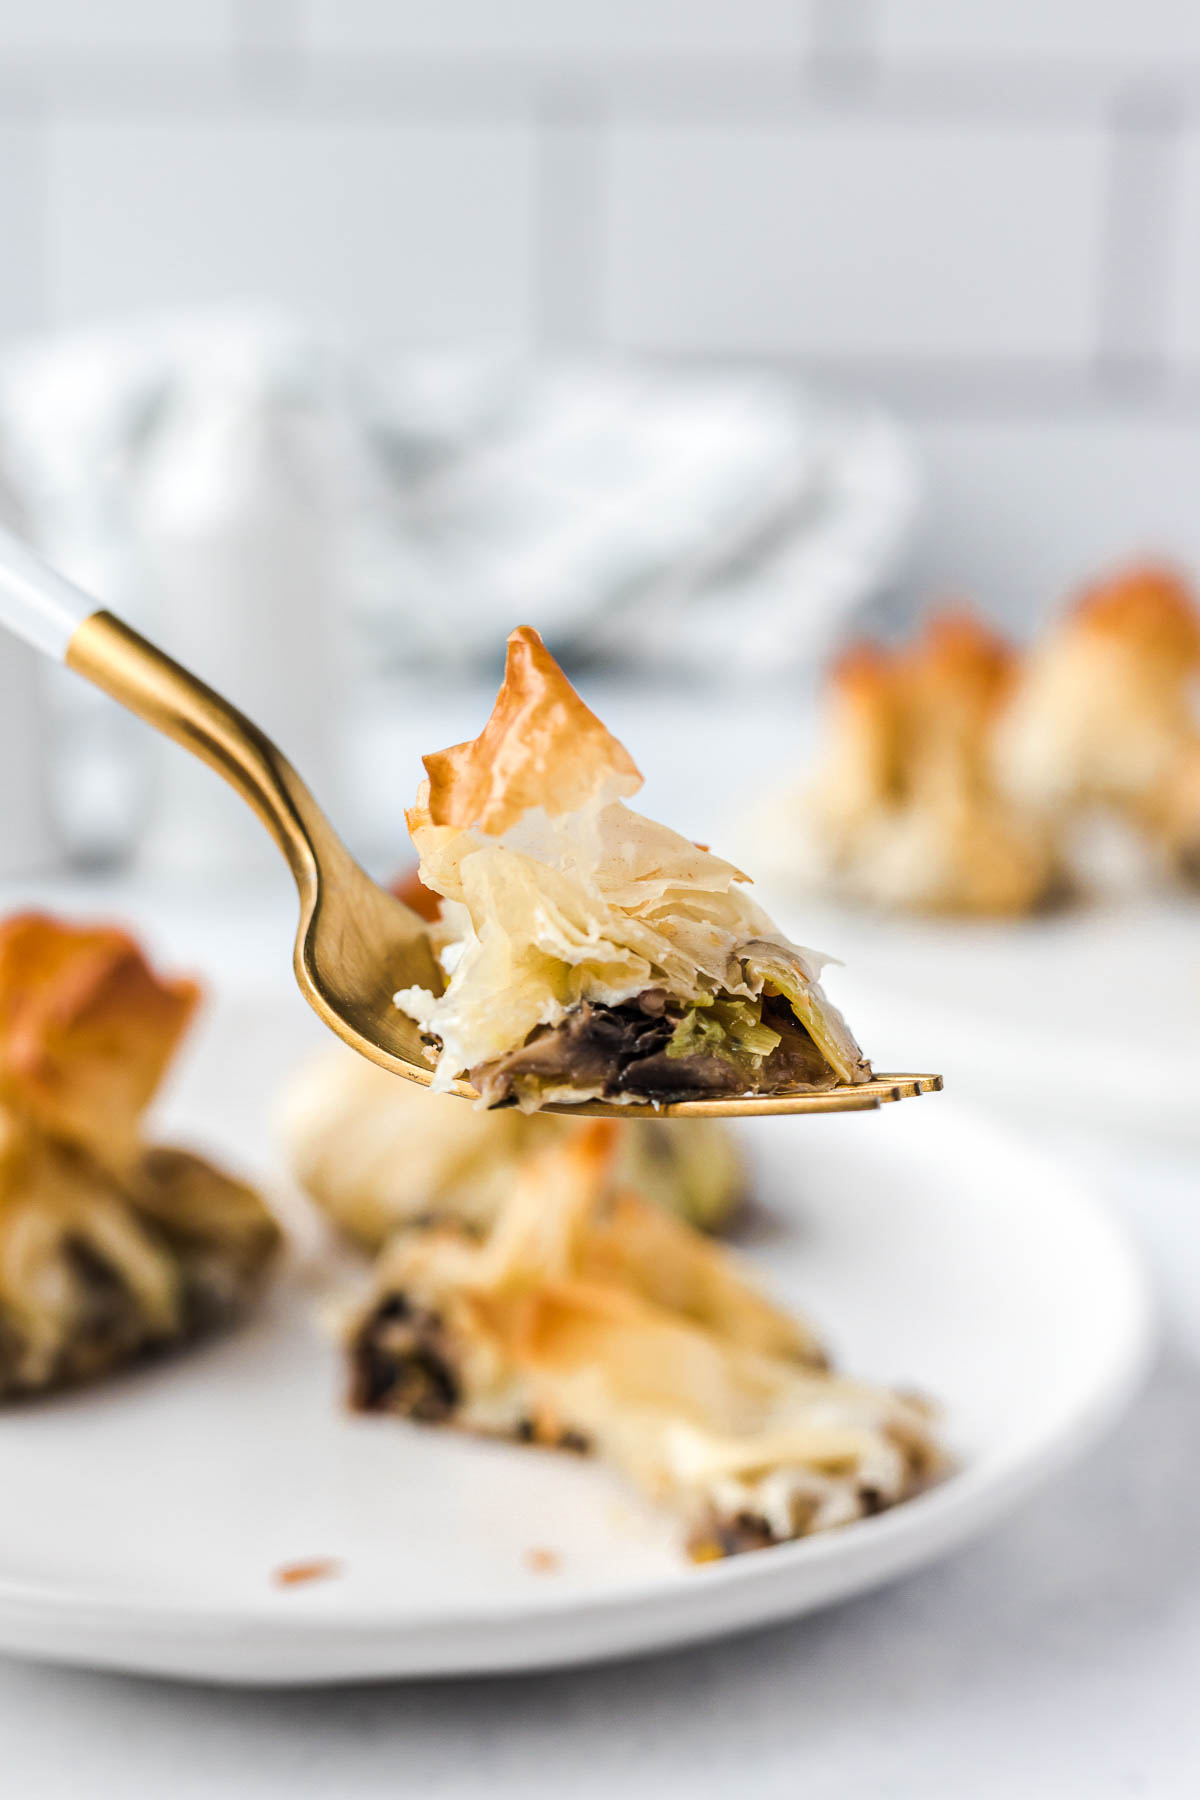 An open mushroom goat cheese filled filo pastry parcel on a fork.